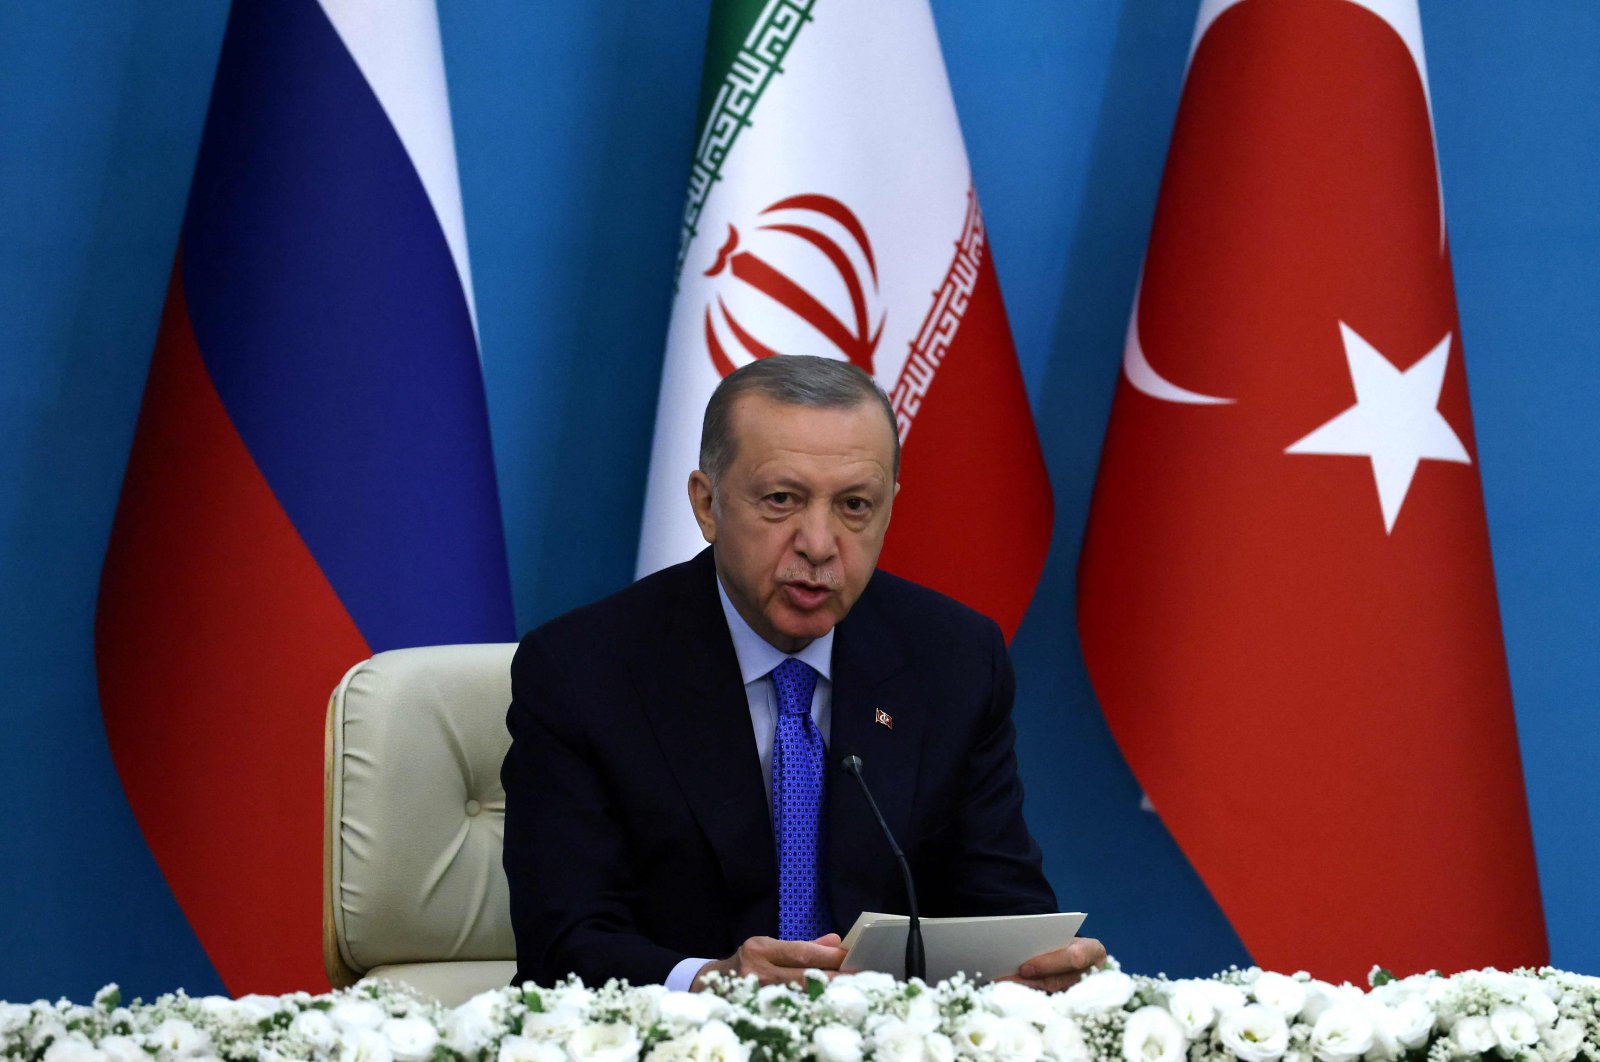 President Recep Tayyip Erdoğan speaks during a joint press conference with his Iranian and Russian counterparts following their summit in Tehran, Iran, July 19, 2022. (AFP)